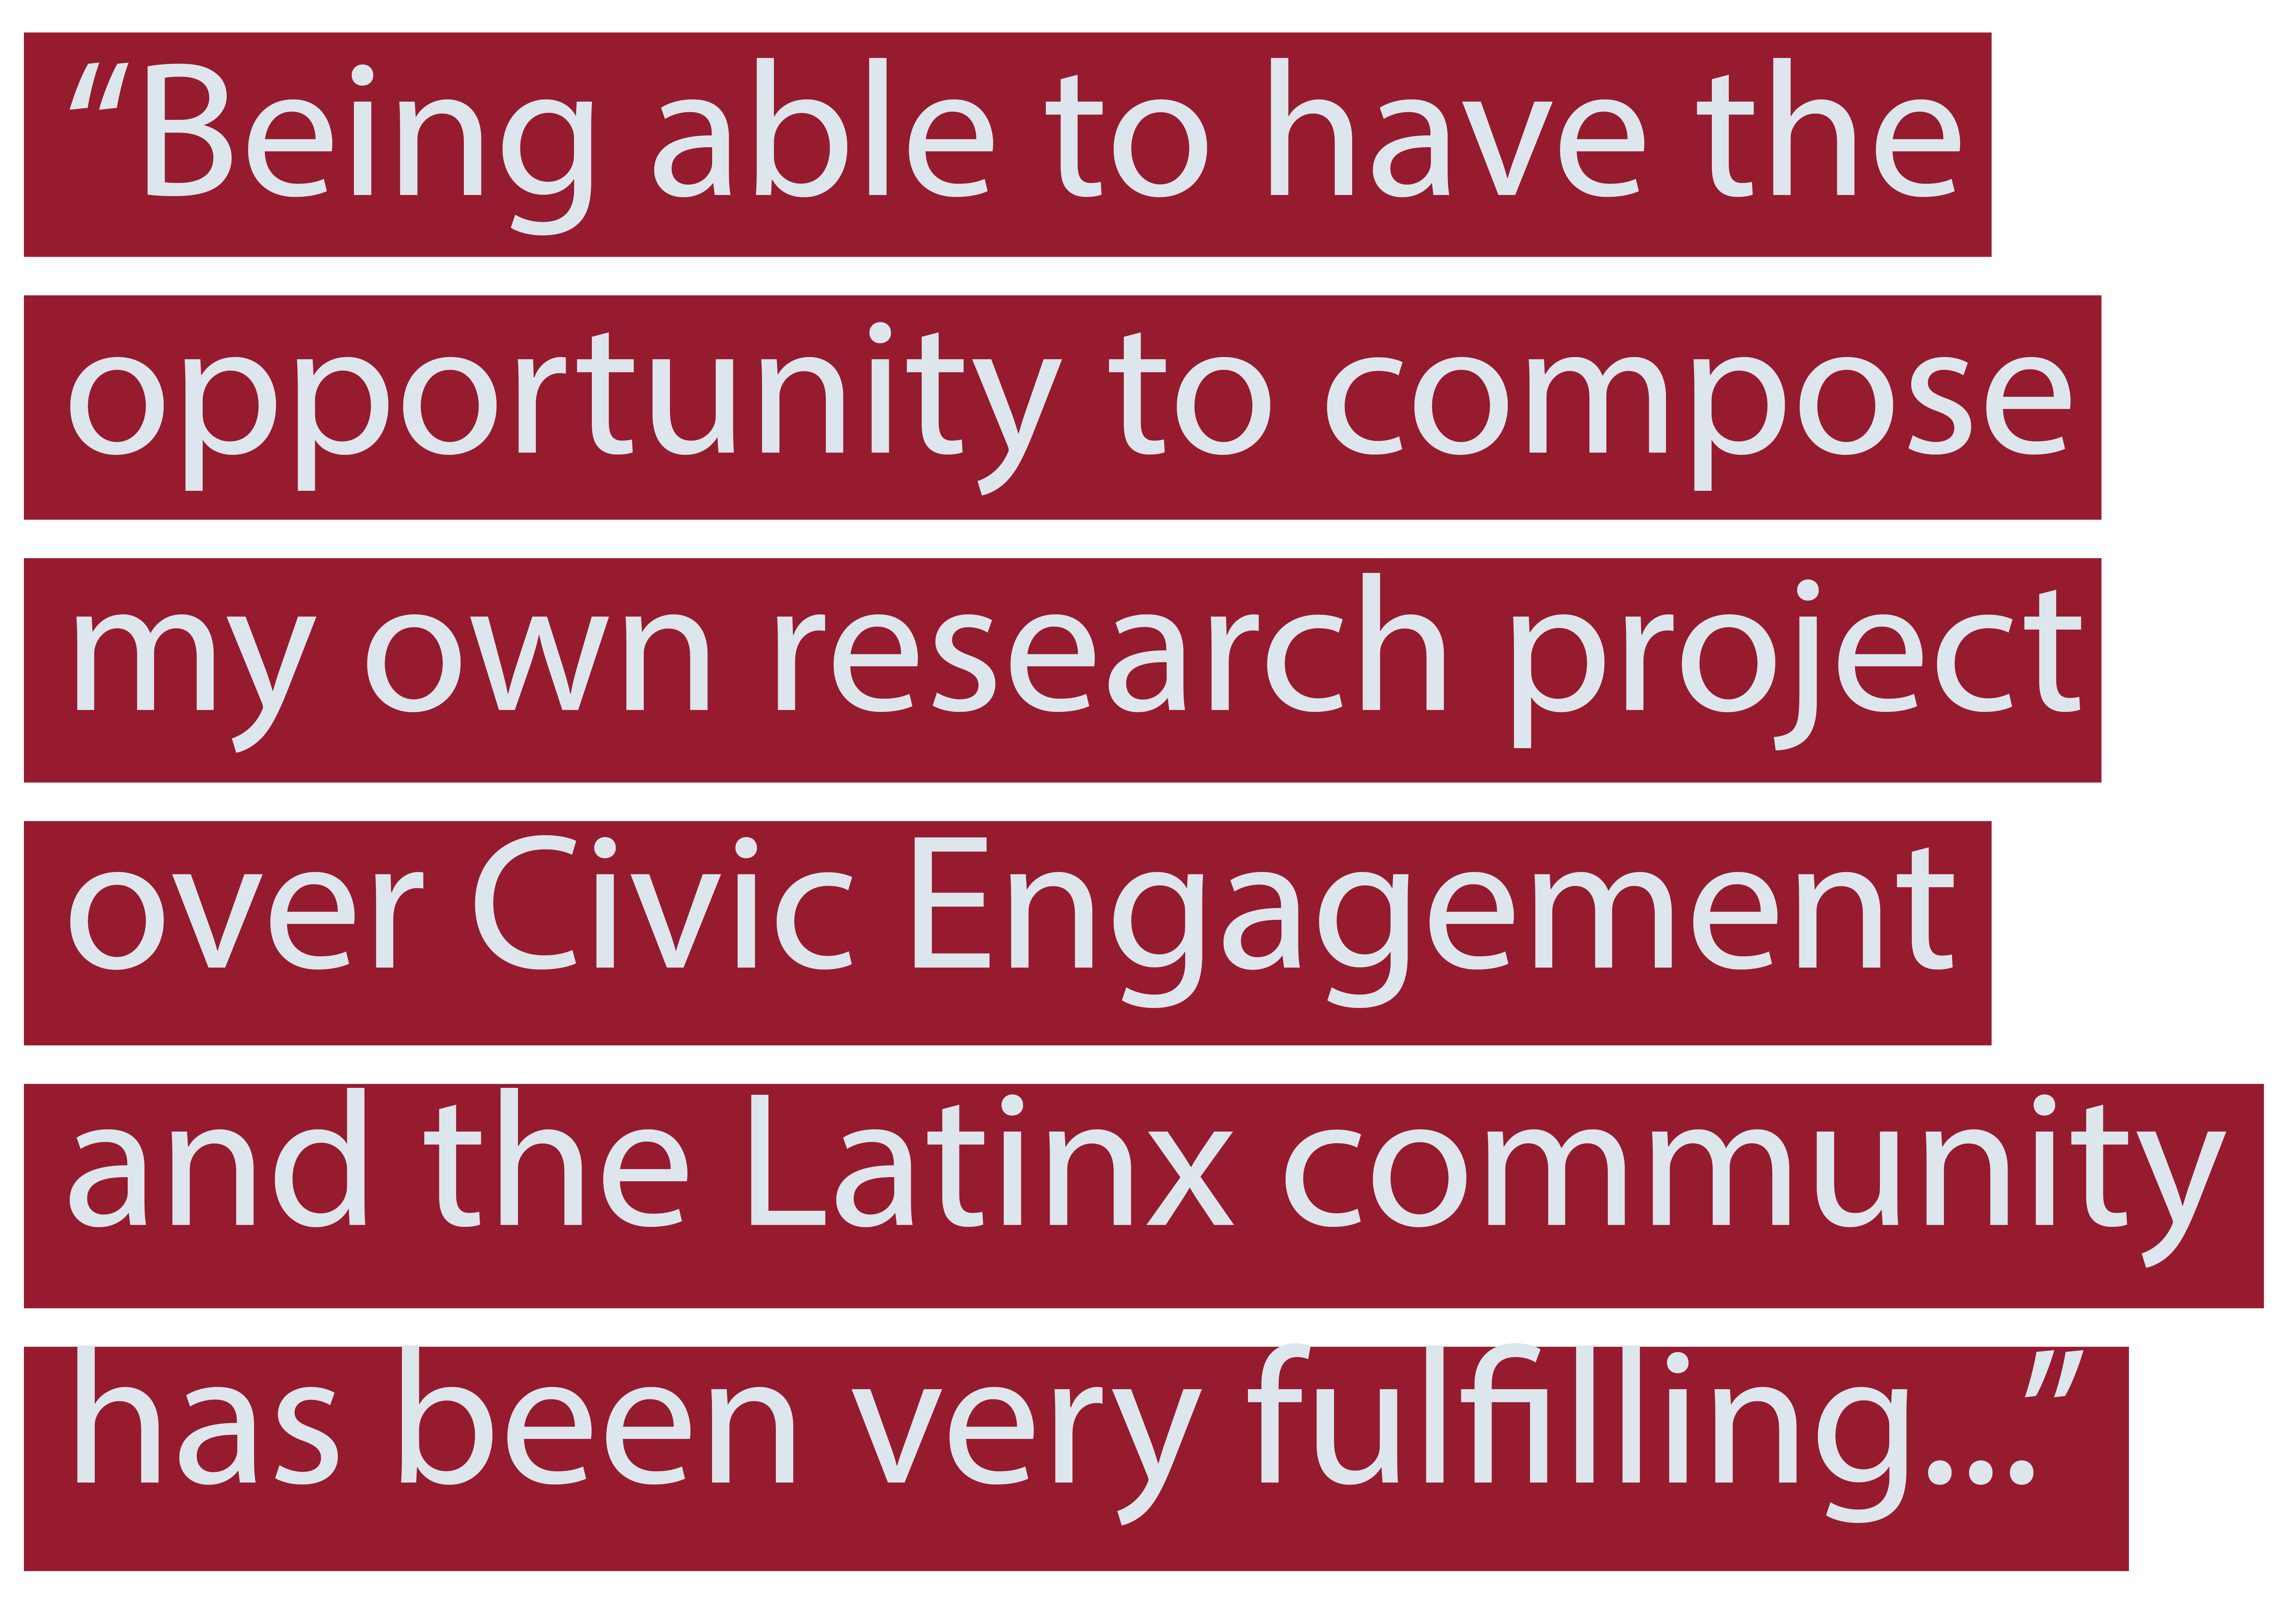 "Being able to have the opportunity to compose my own research project over Civic Engagement and the Linx community has been very fulfilling..."